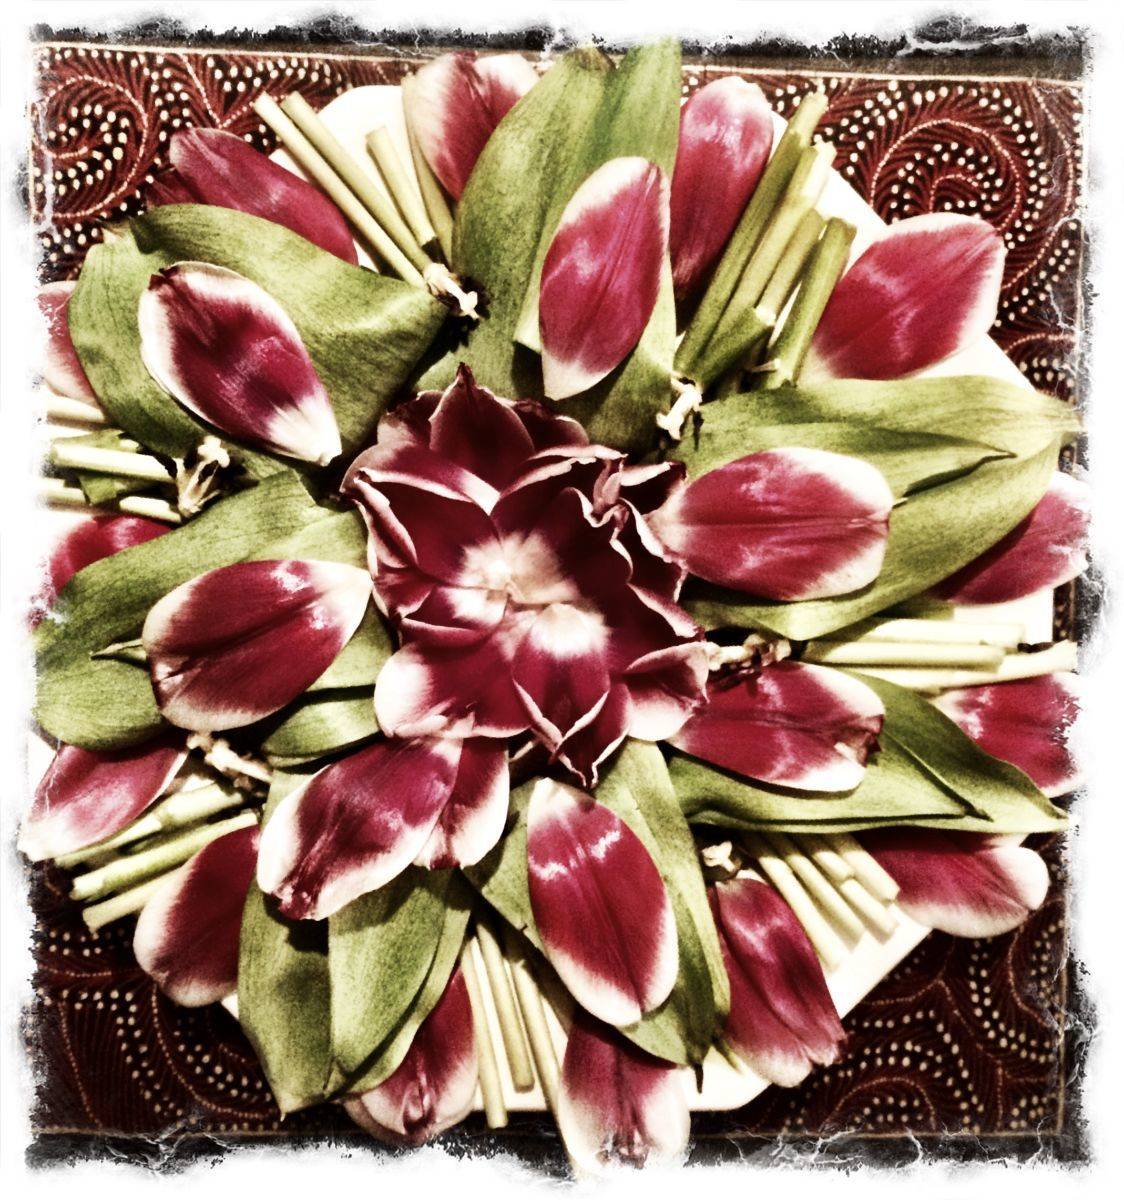 Four days later - Nature Mandala created from tulips that were beginning to fade.